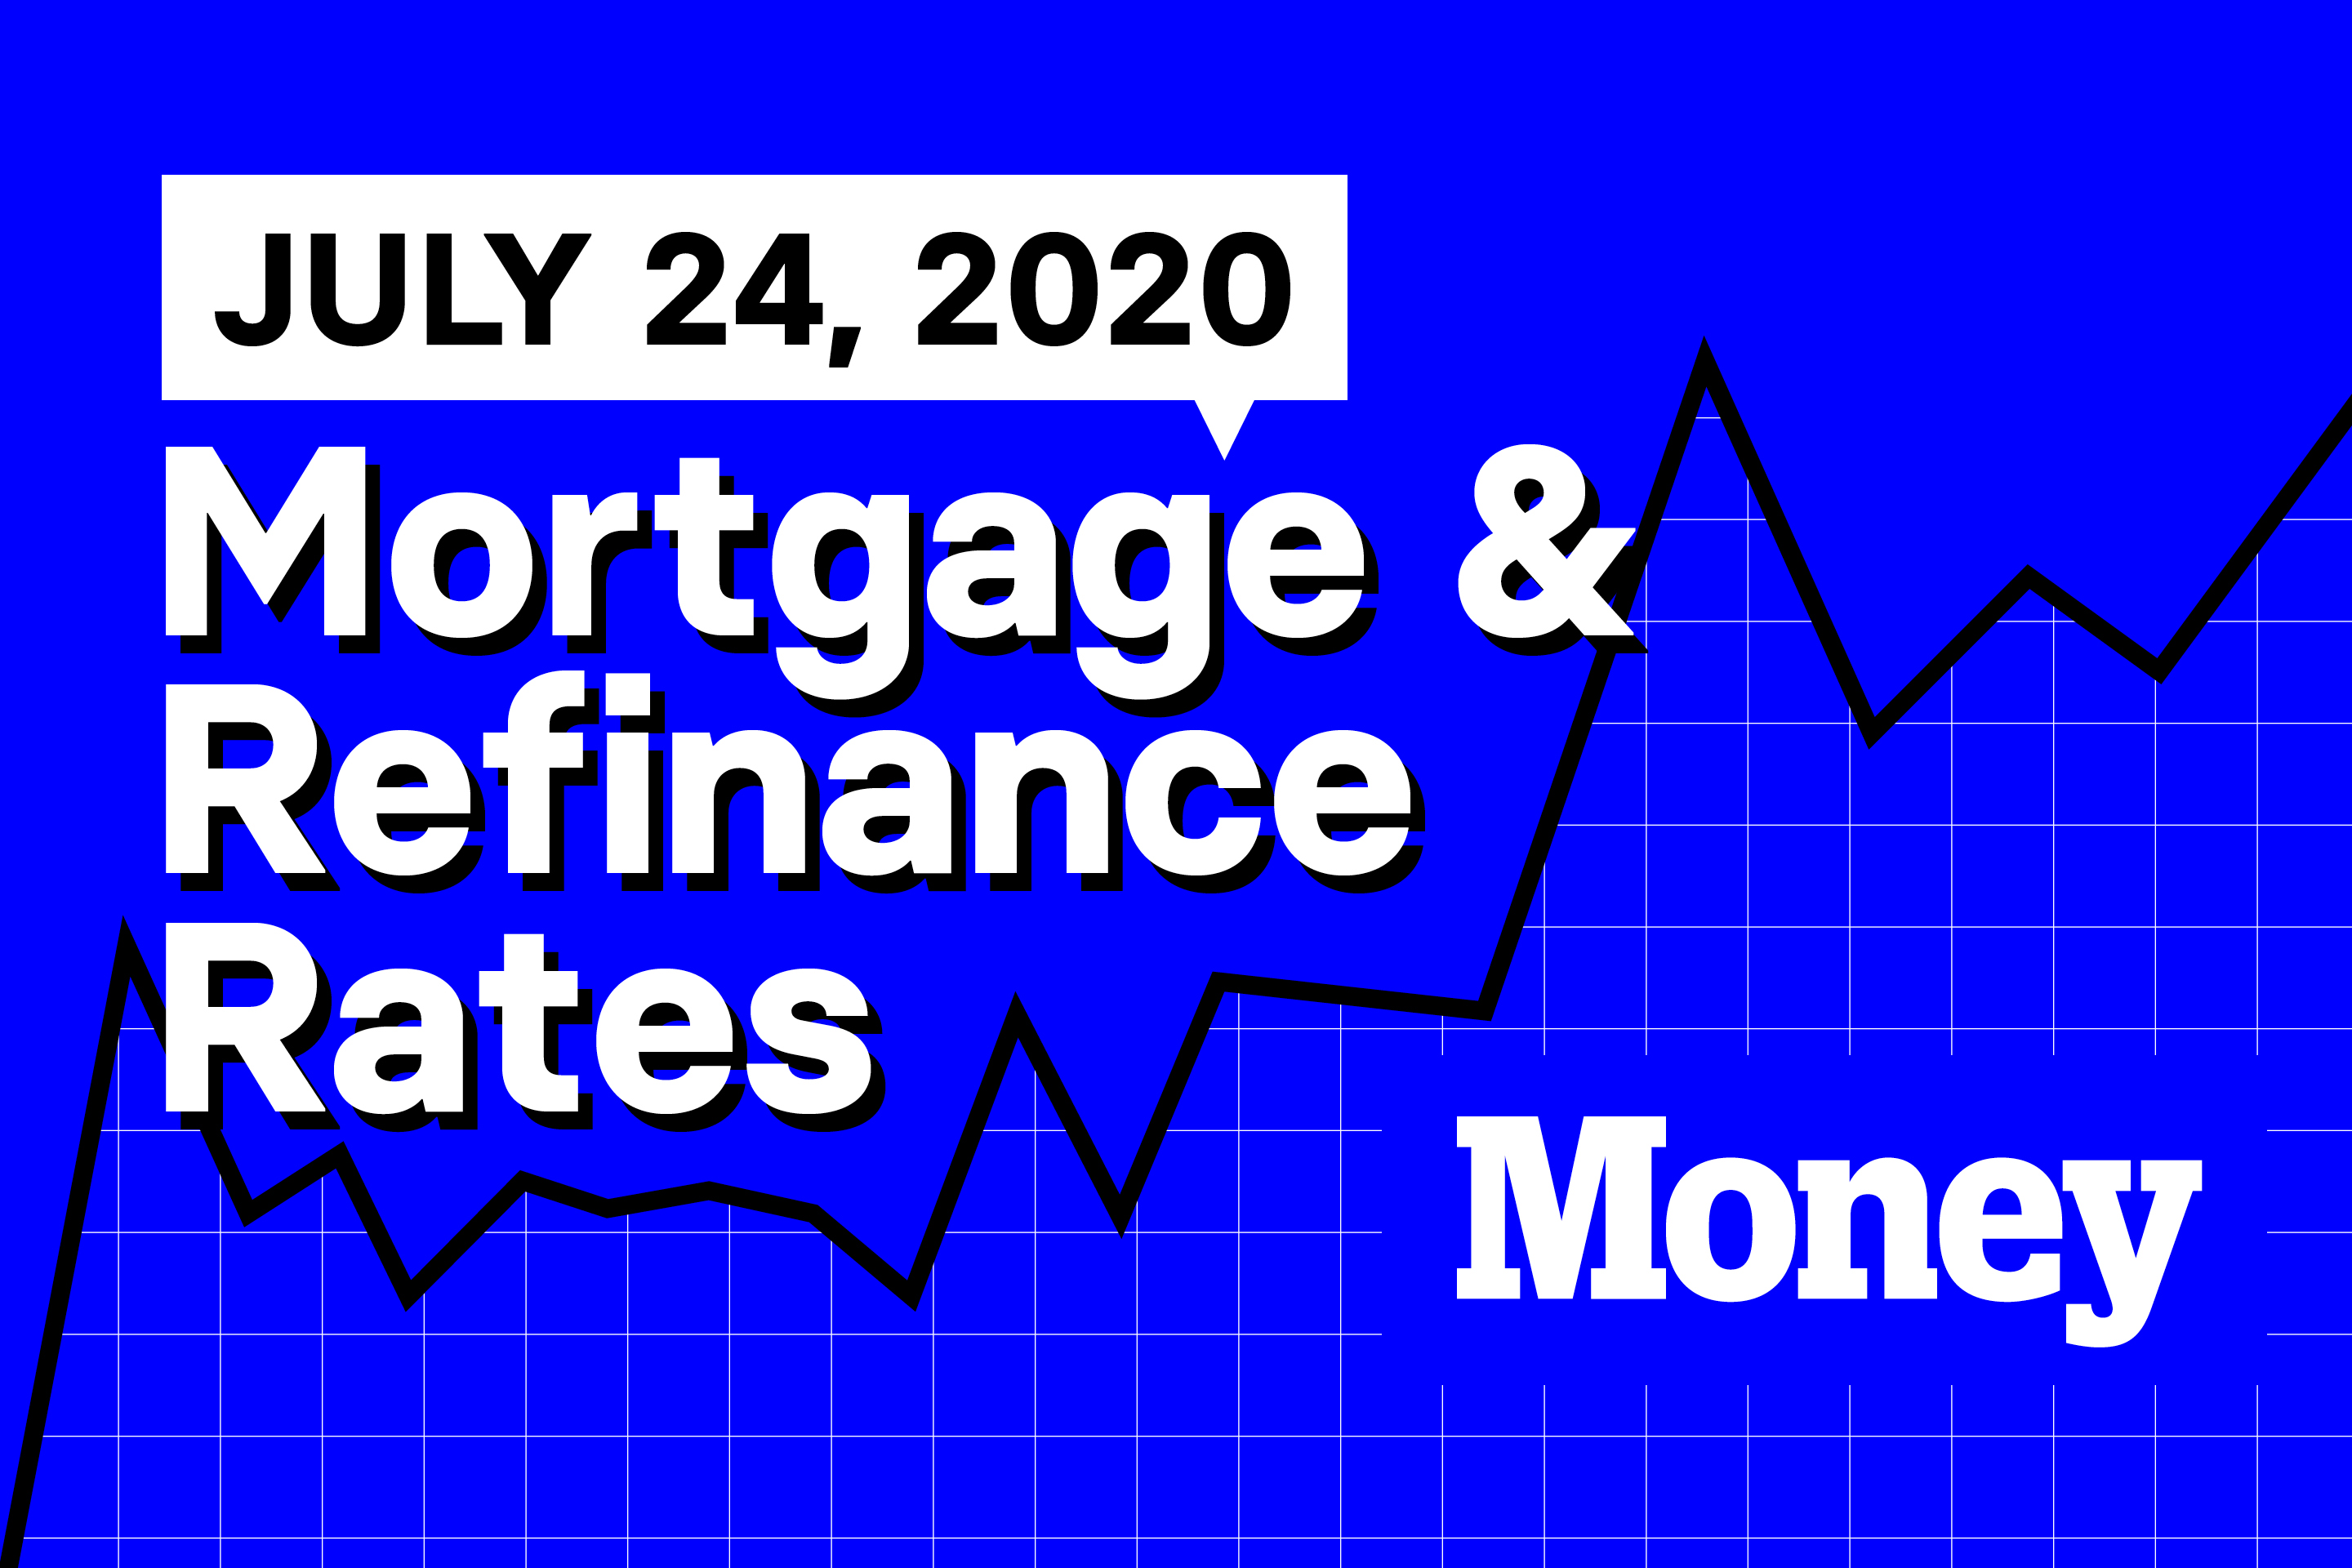 Here Are Today's Best Mortgage &amp; Refinance Rates for July 24, 2020